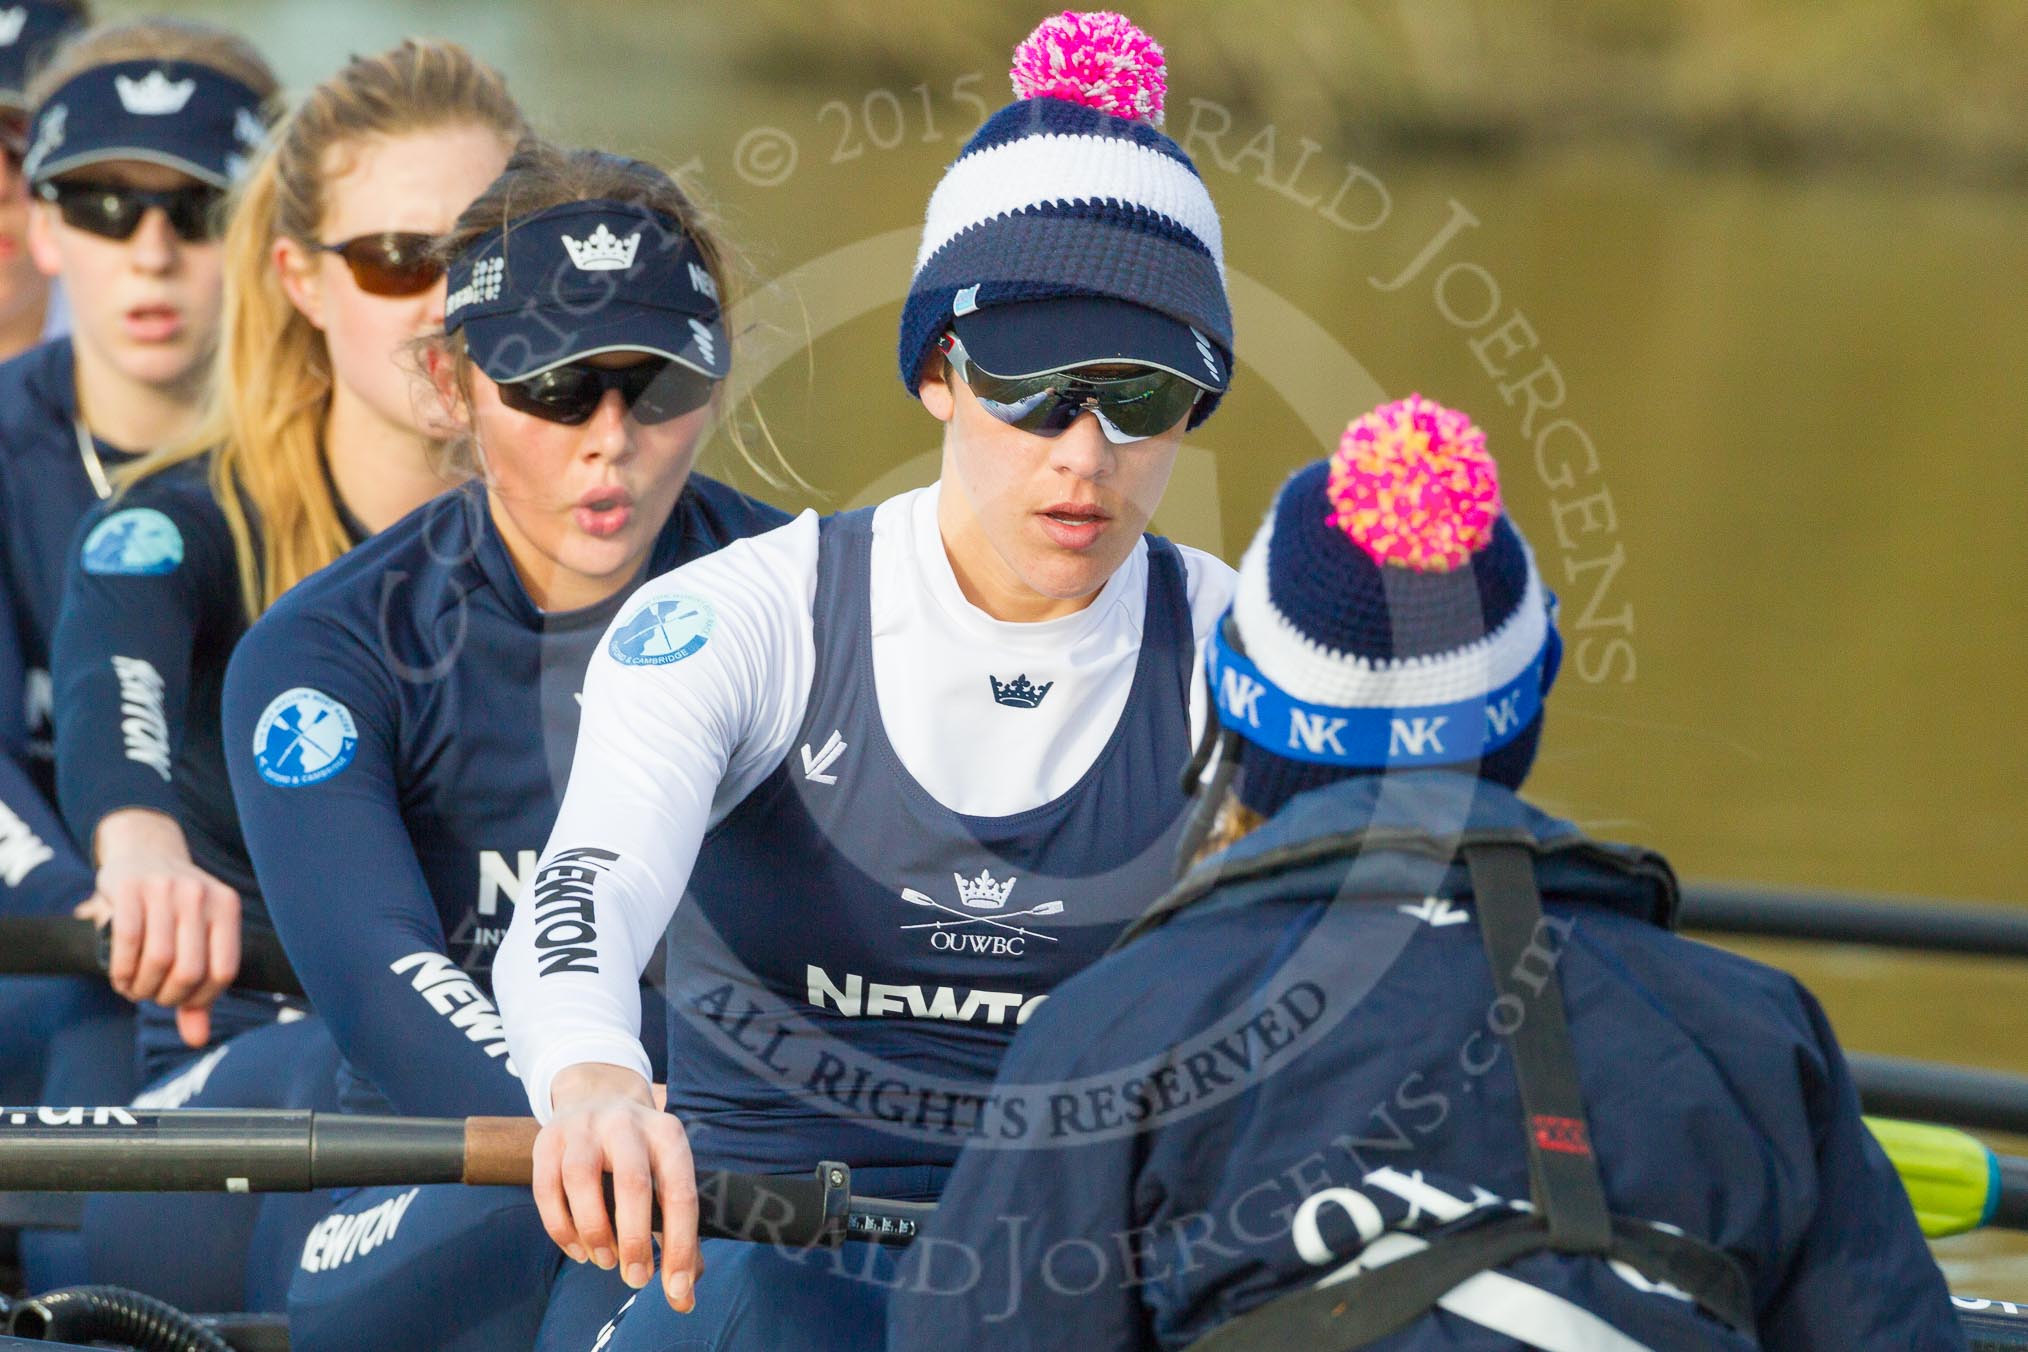 The Boat Race season 2015: OUWBC training Wallingford.

Wallingford,

United Kingdom,
on 04 March 2015 at 15:59, image #135